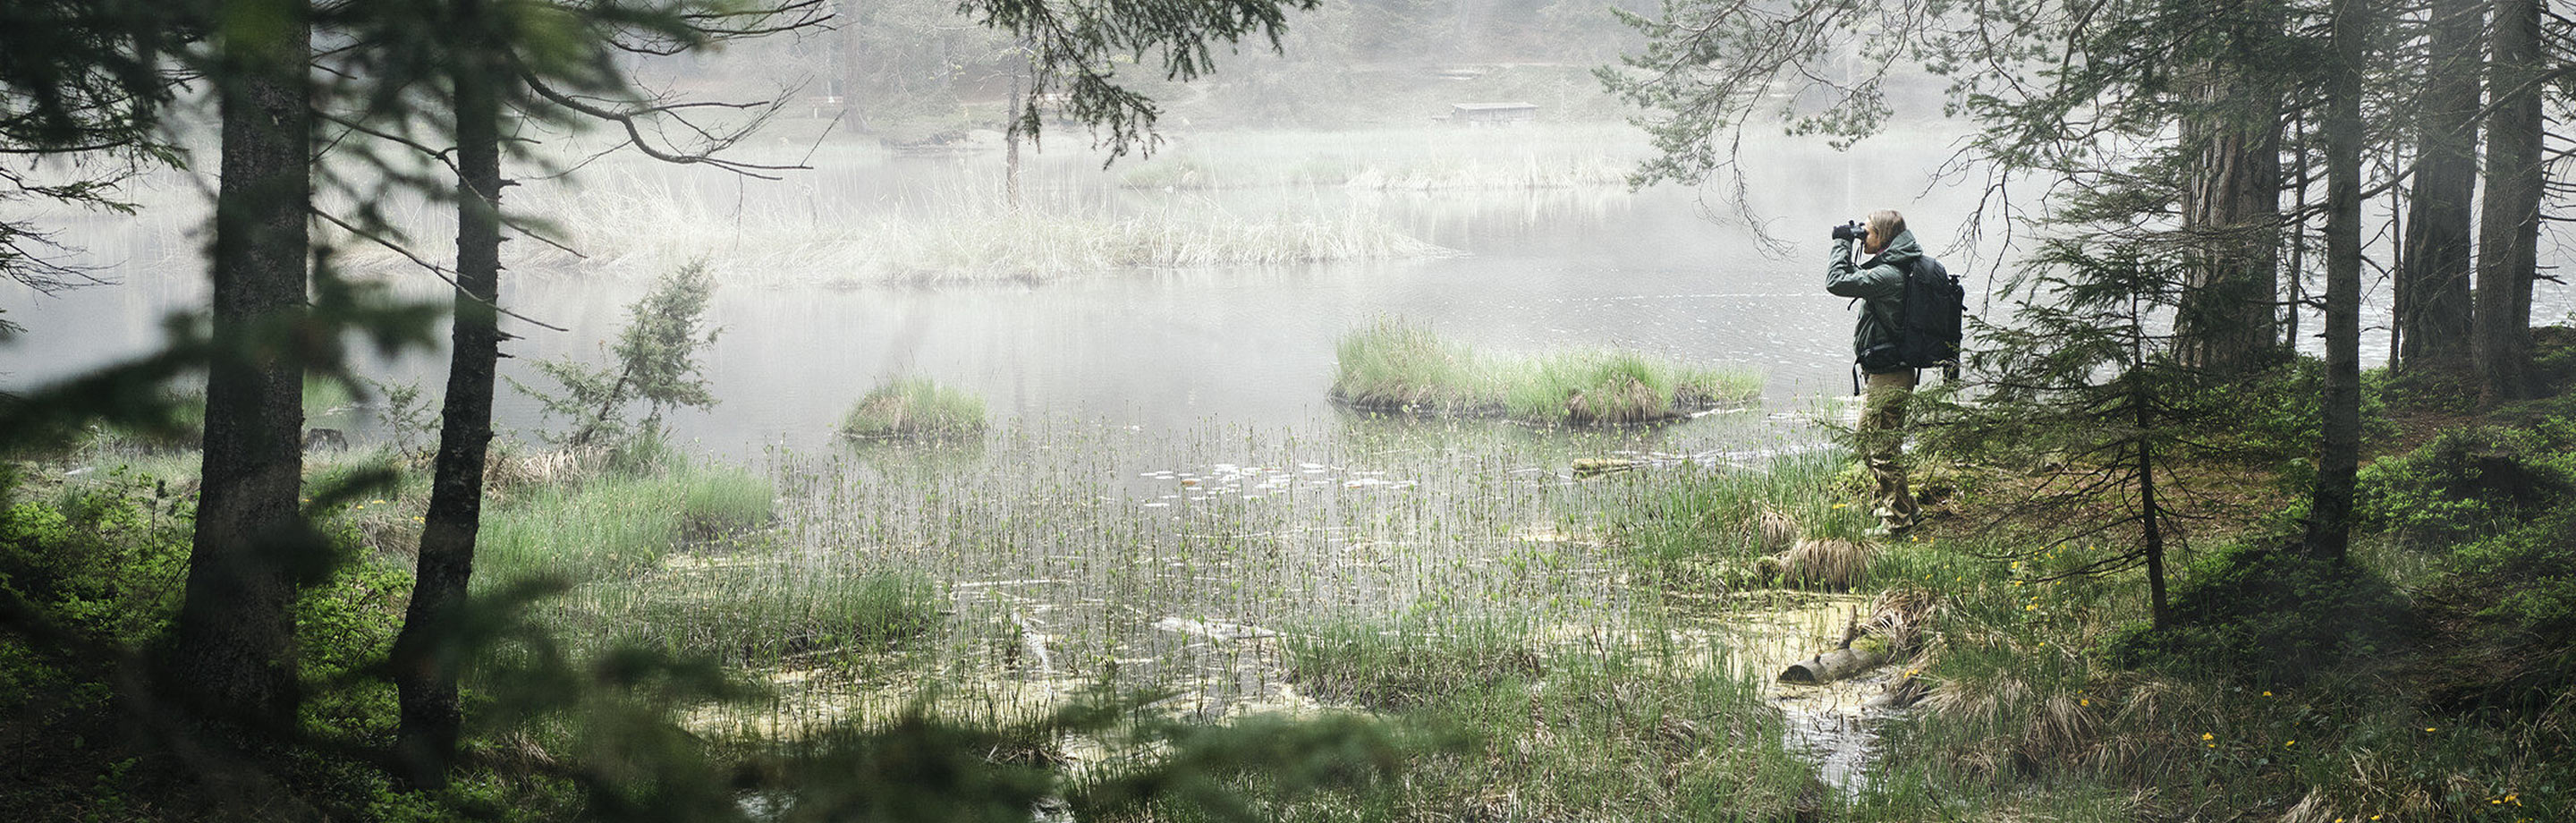 A misty landscape on the edge of a forest with a plant-covered lake. A nature observer with a rucksack is standing on the shore, looking through binoculars.